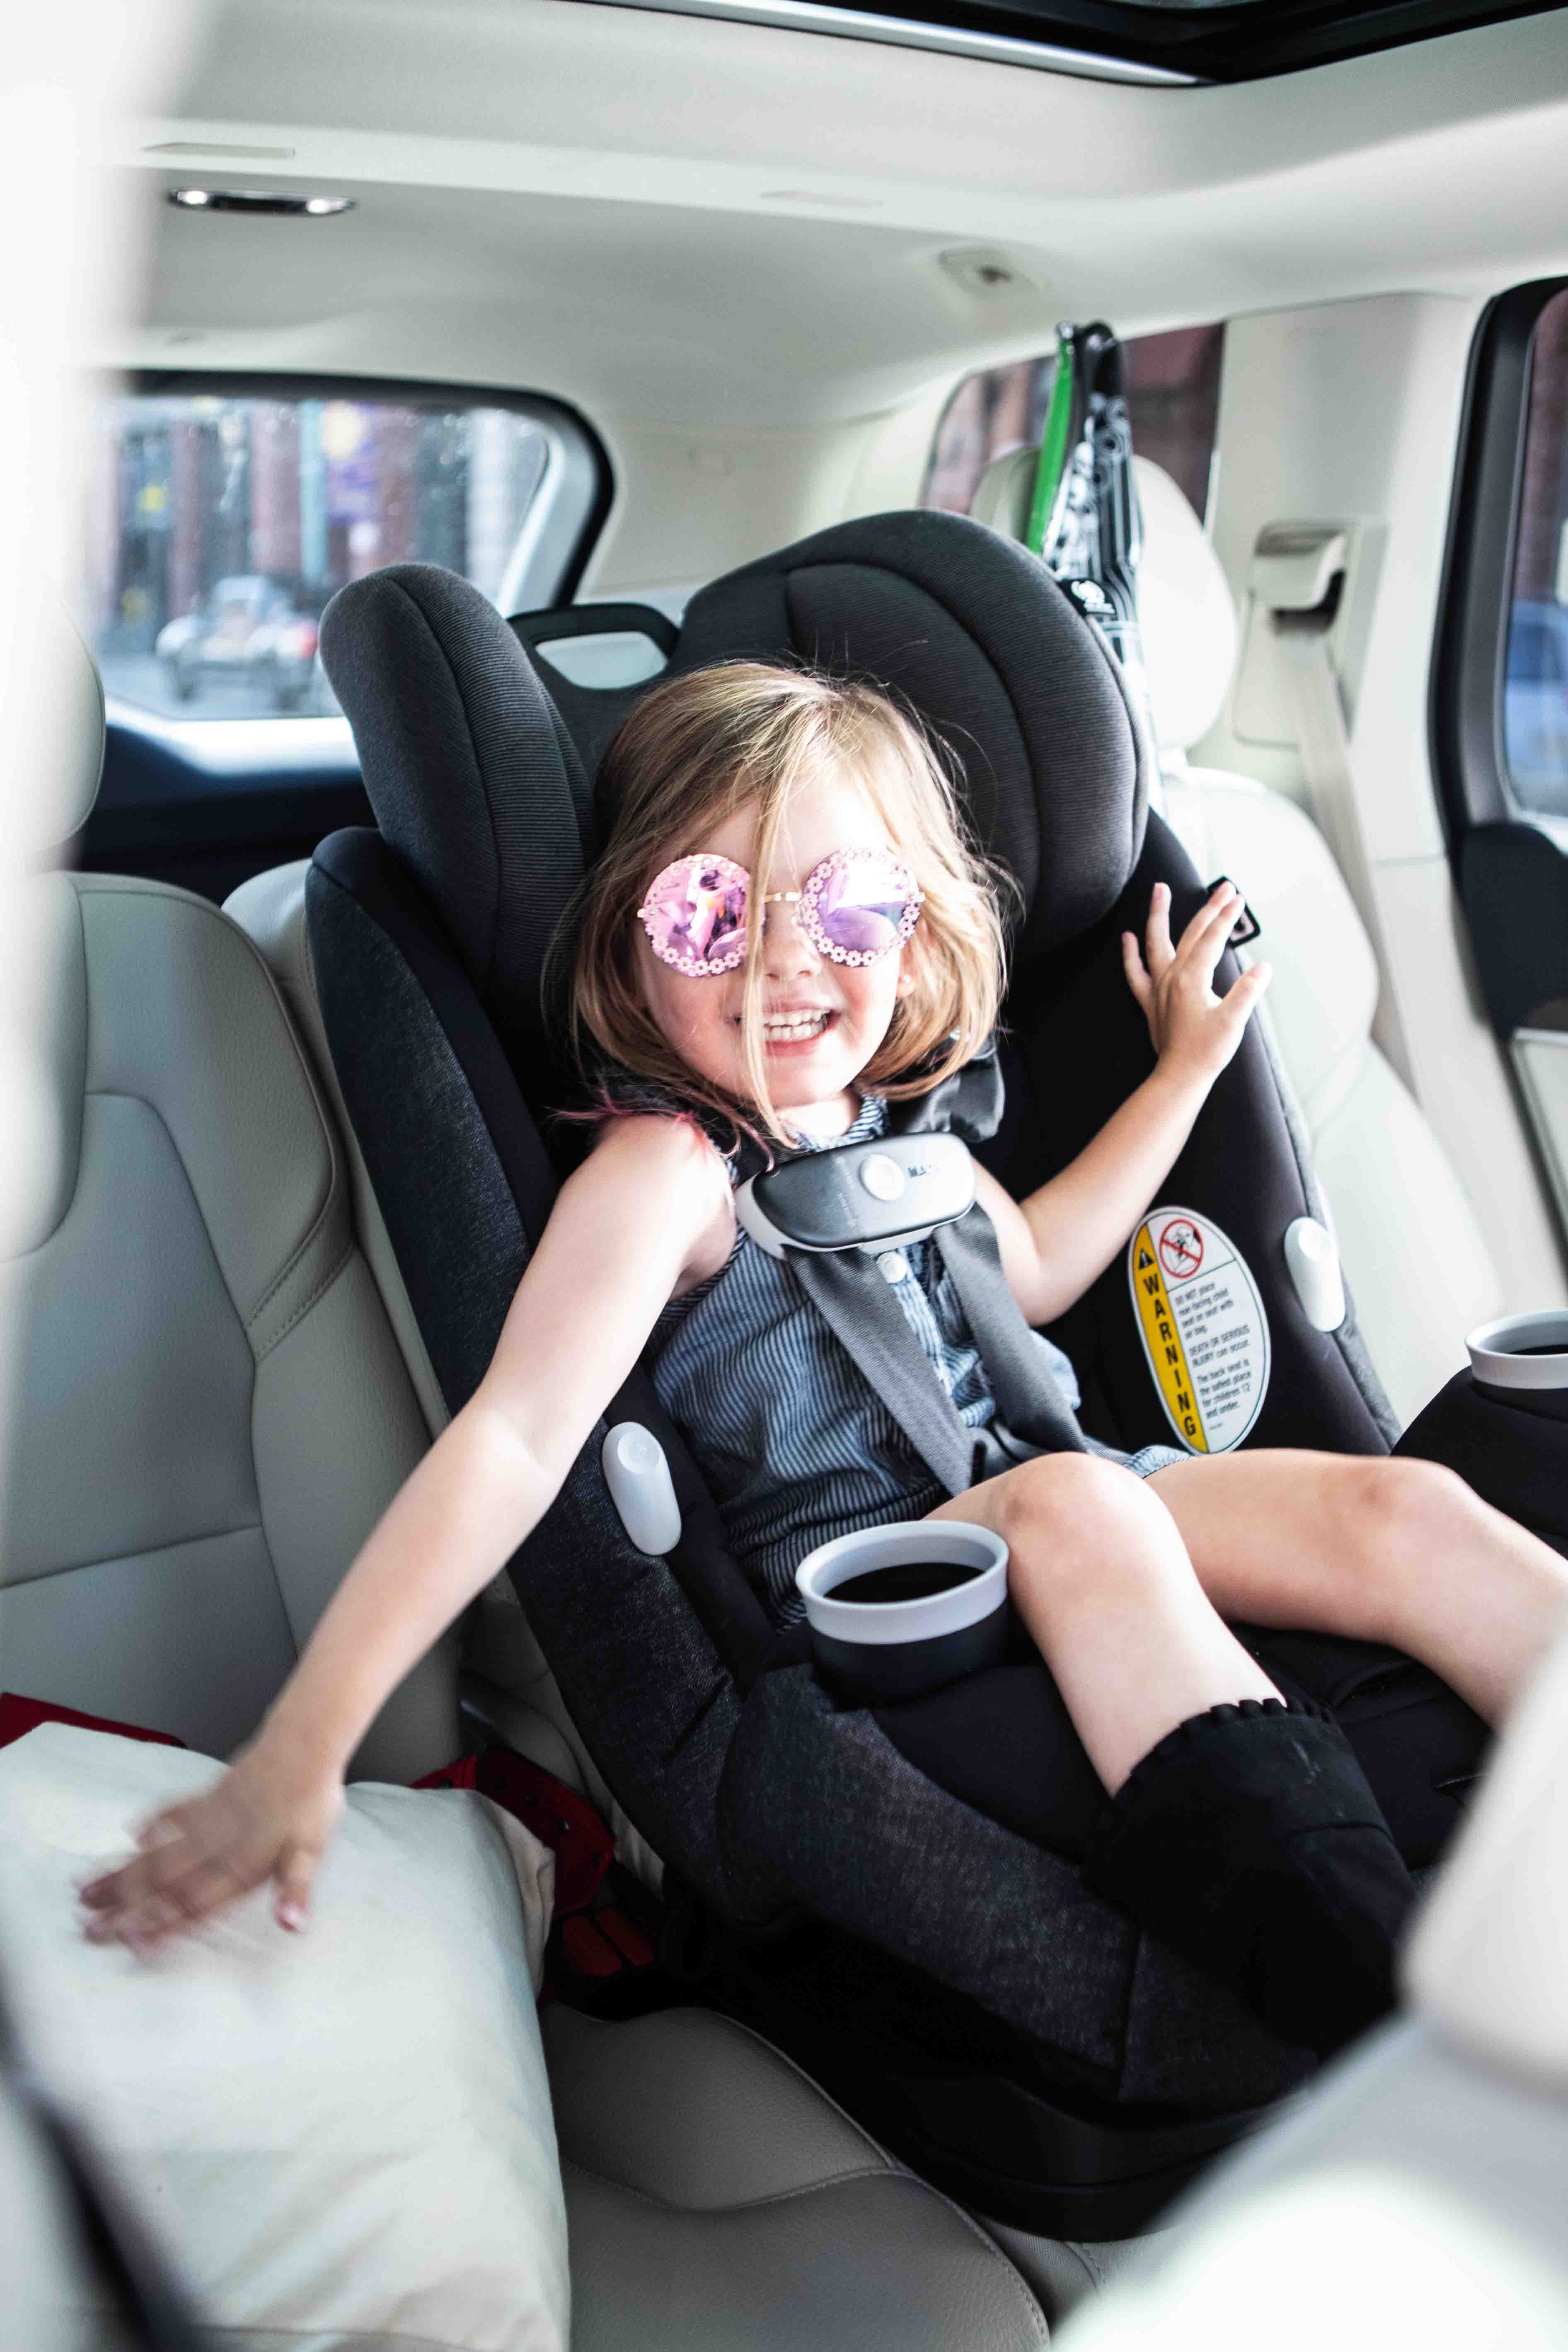 Little girl wearing sunglasses smiling in convertible car seat